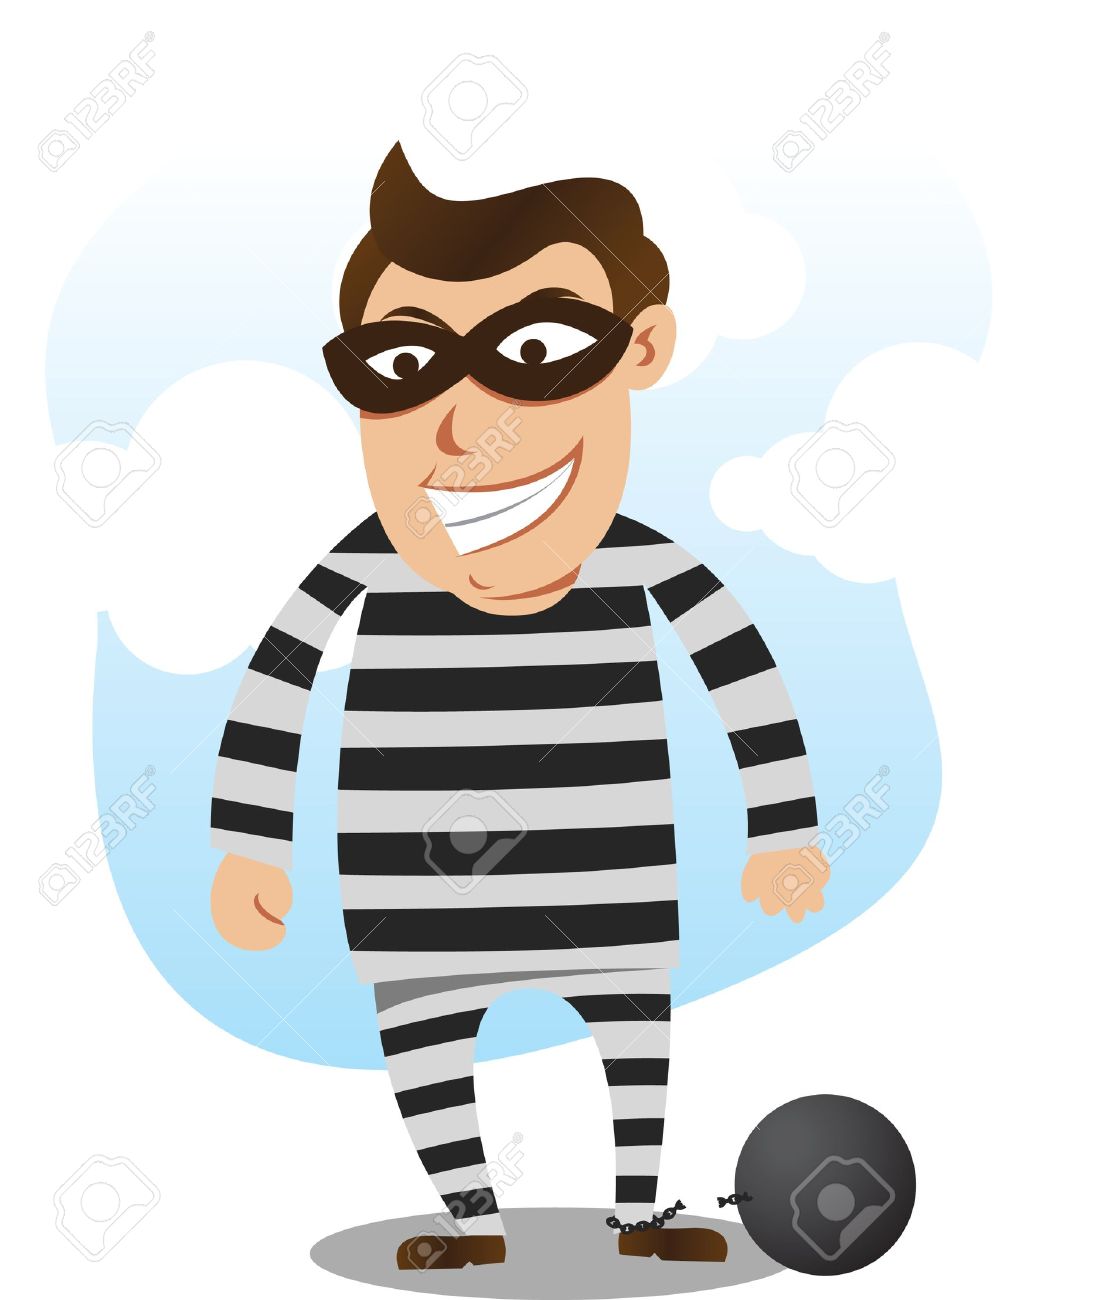 Robber Free From Jail Royalty Free Cliparts, Vectors, And Stock.